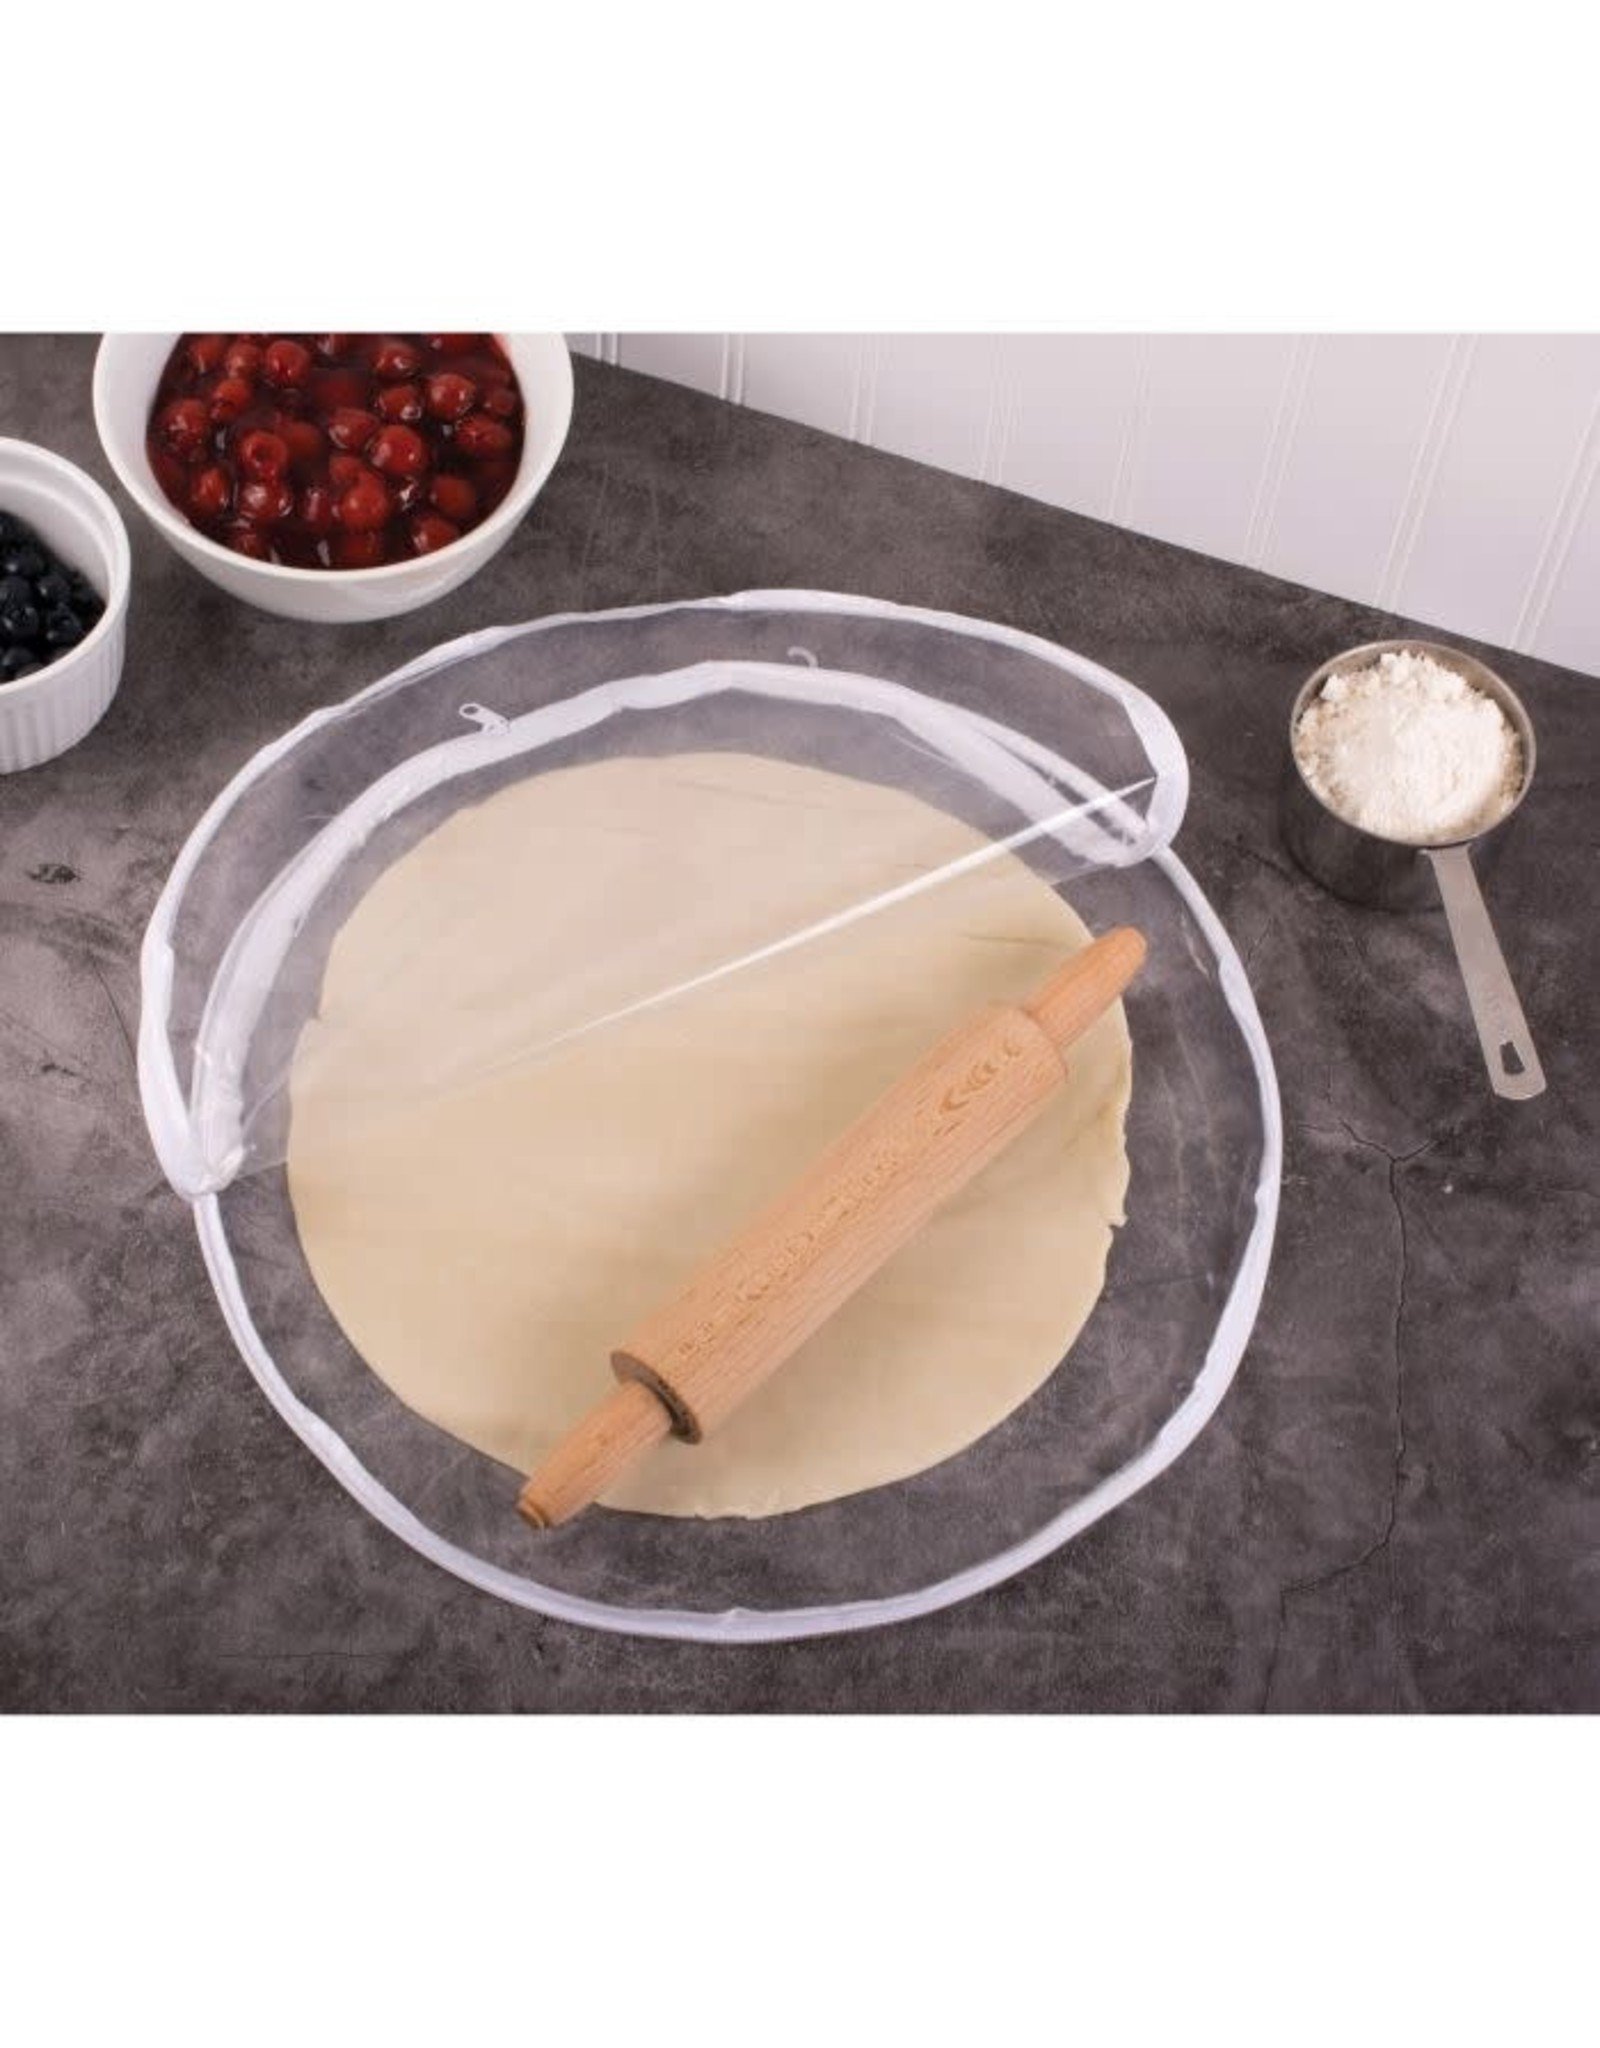 Pie Crust Bag-11” and 12” Pies